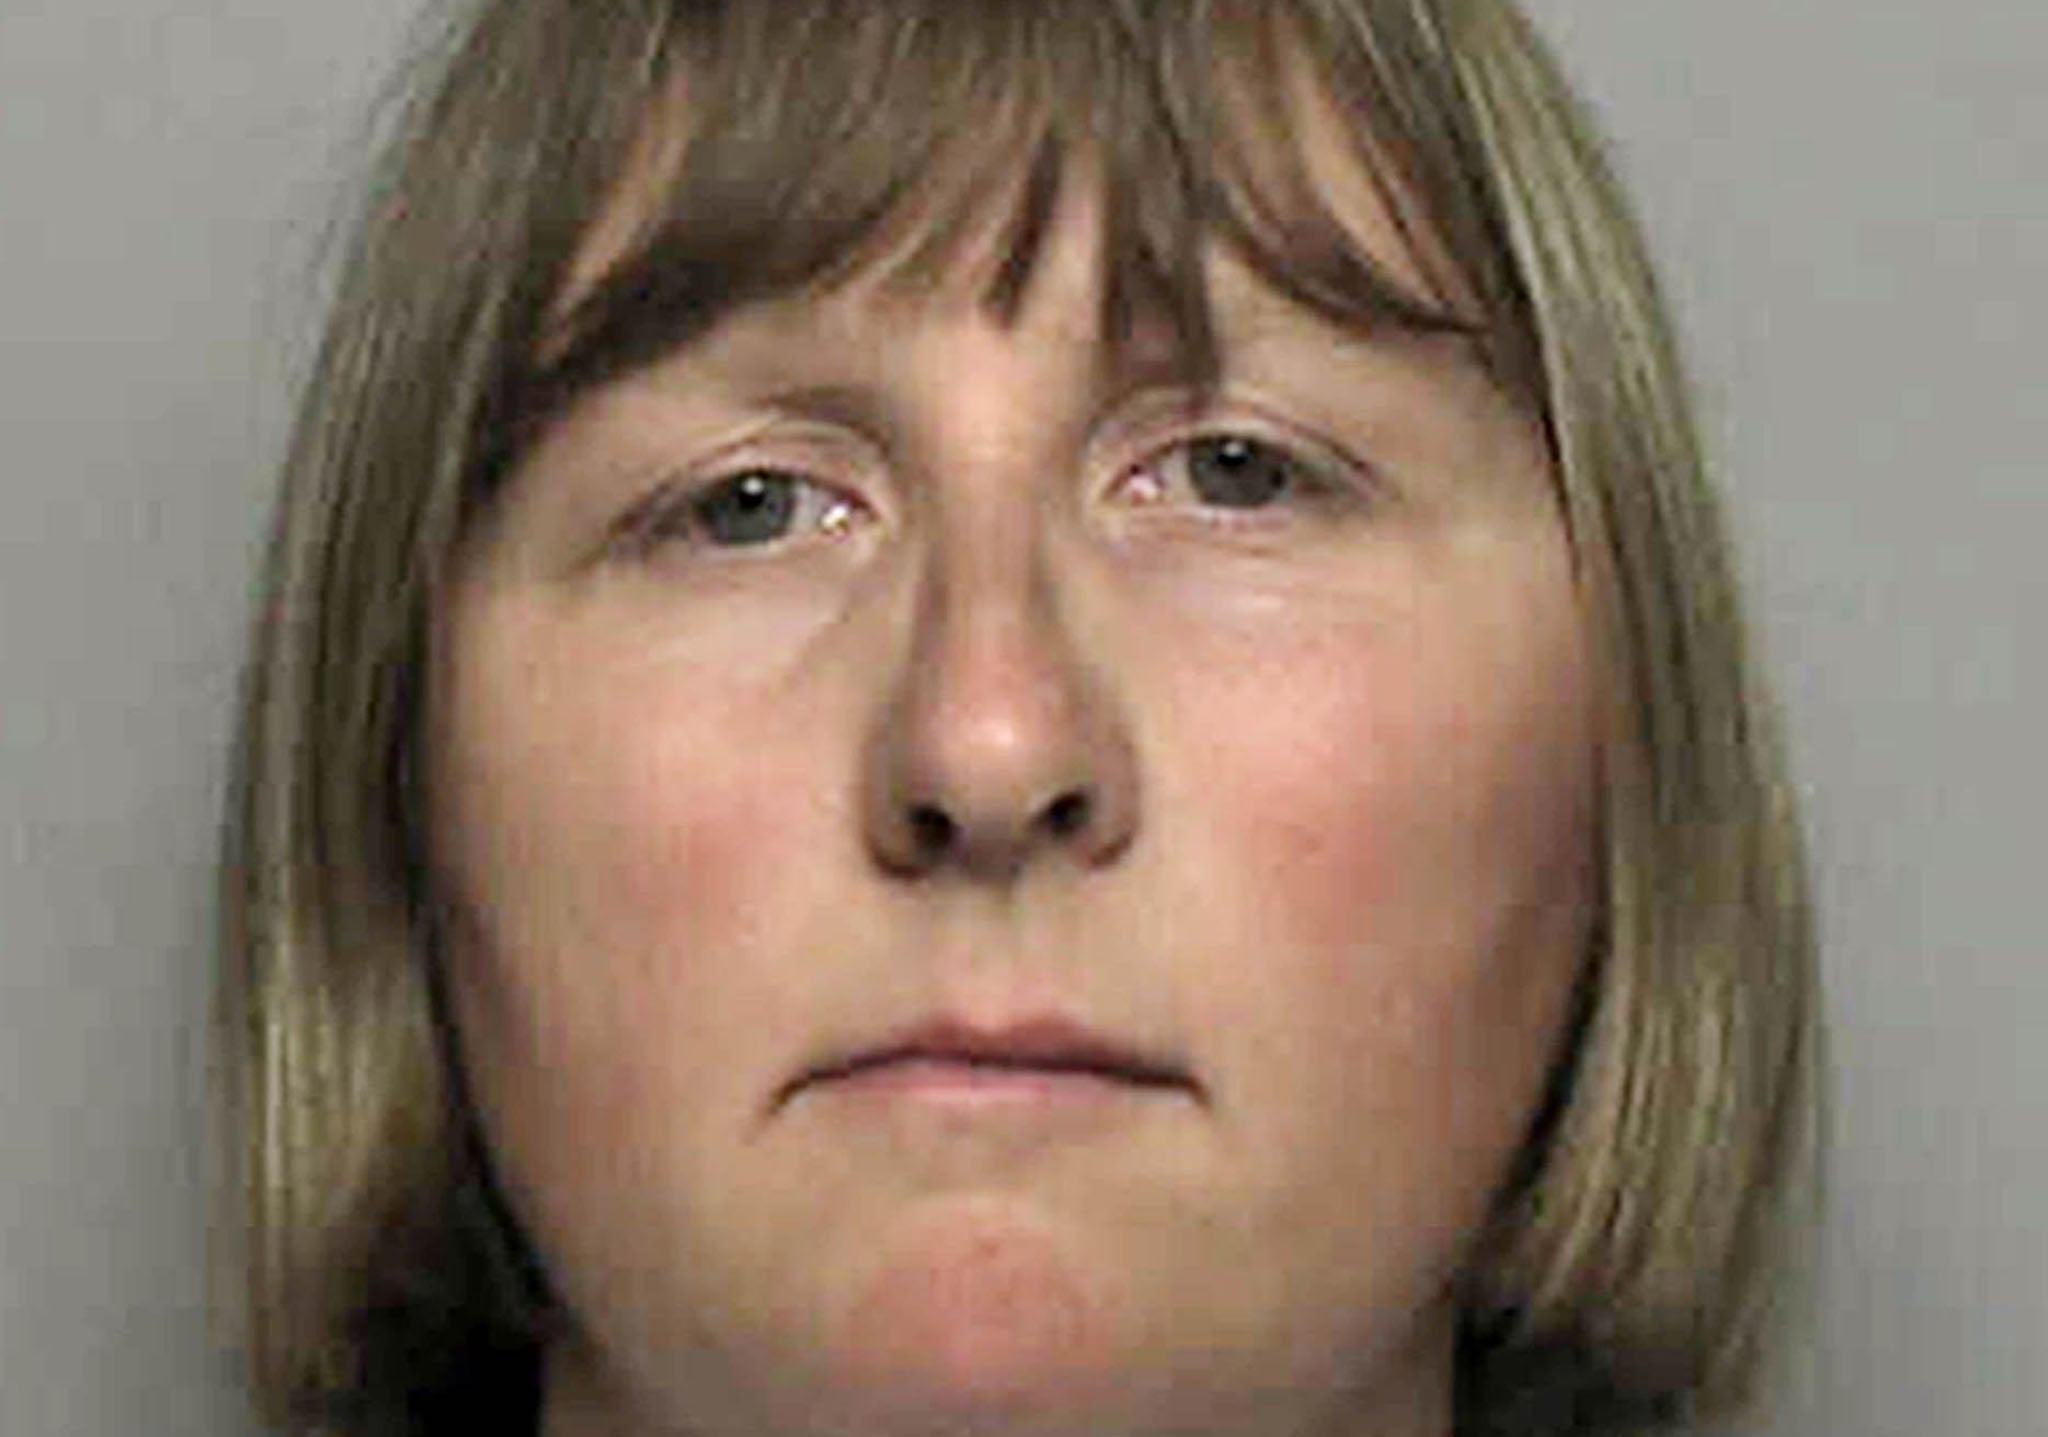 Lesley Dunford, 37, was already serving a prison sentence for the death of her daughter has confessed to the murder of her son